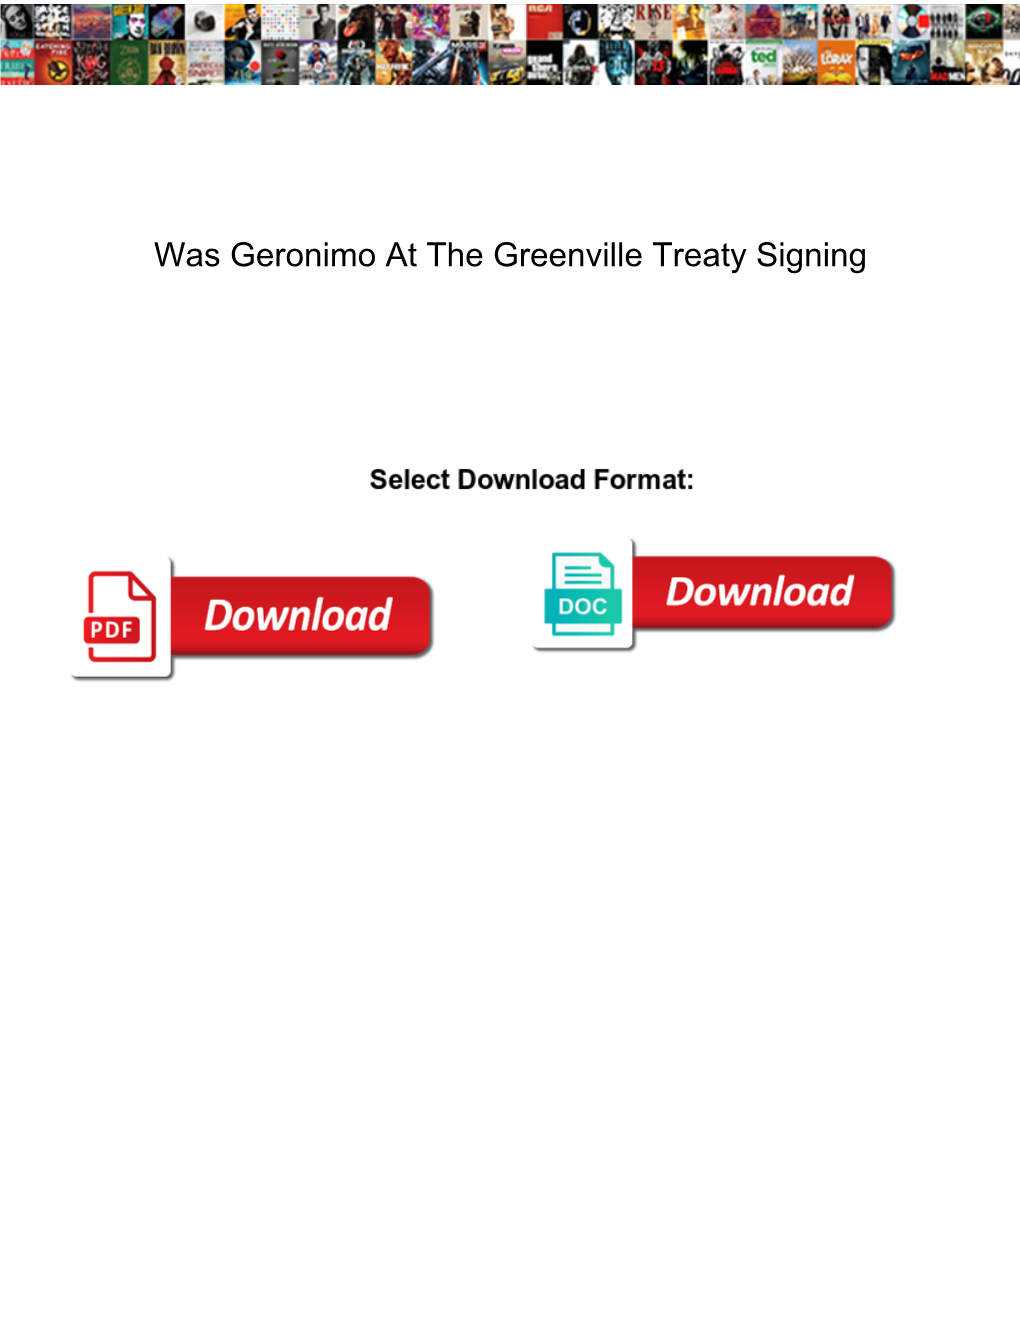 Was Geronimo at the Greenville Treaty Signing